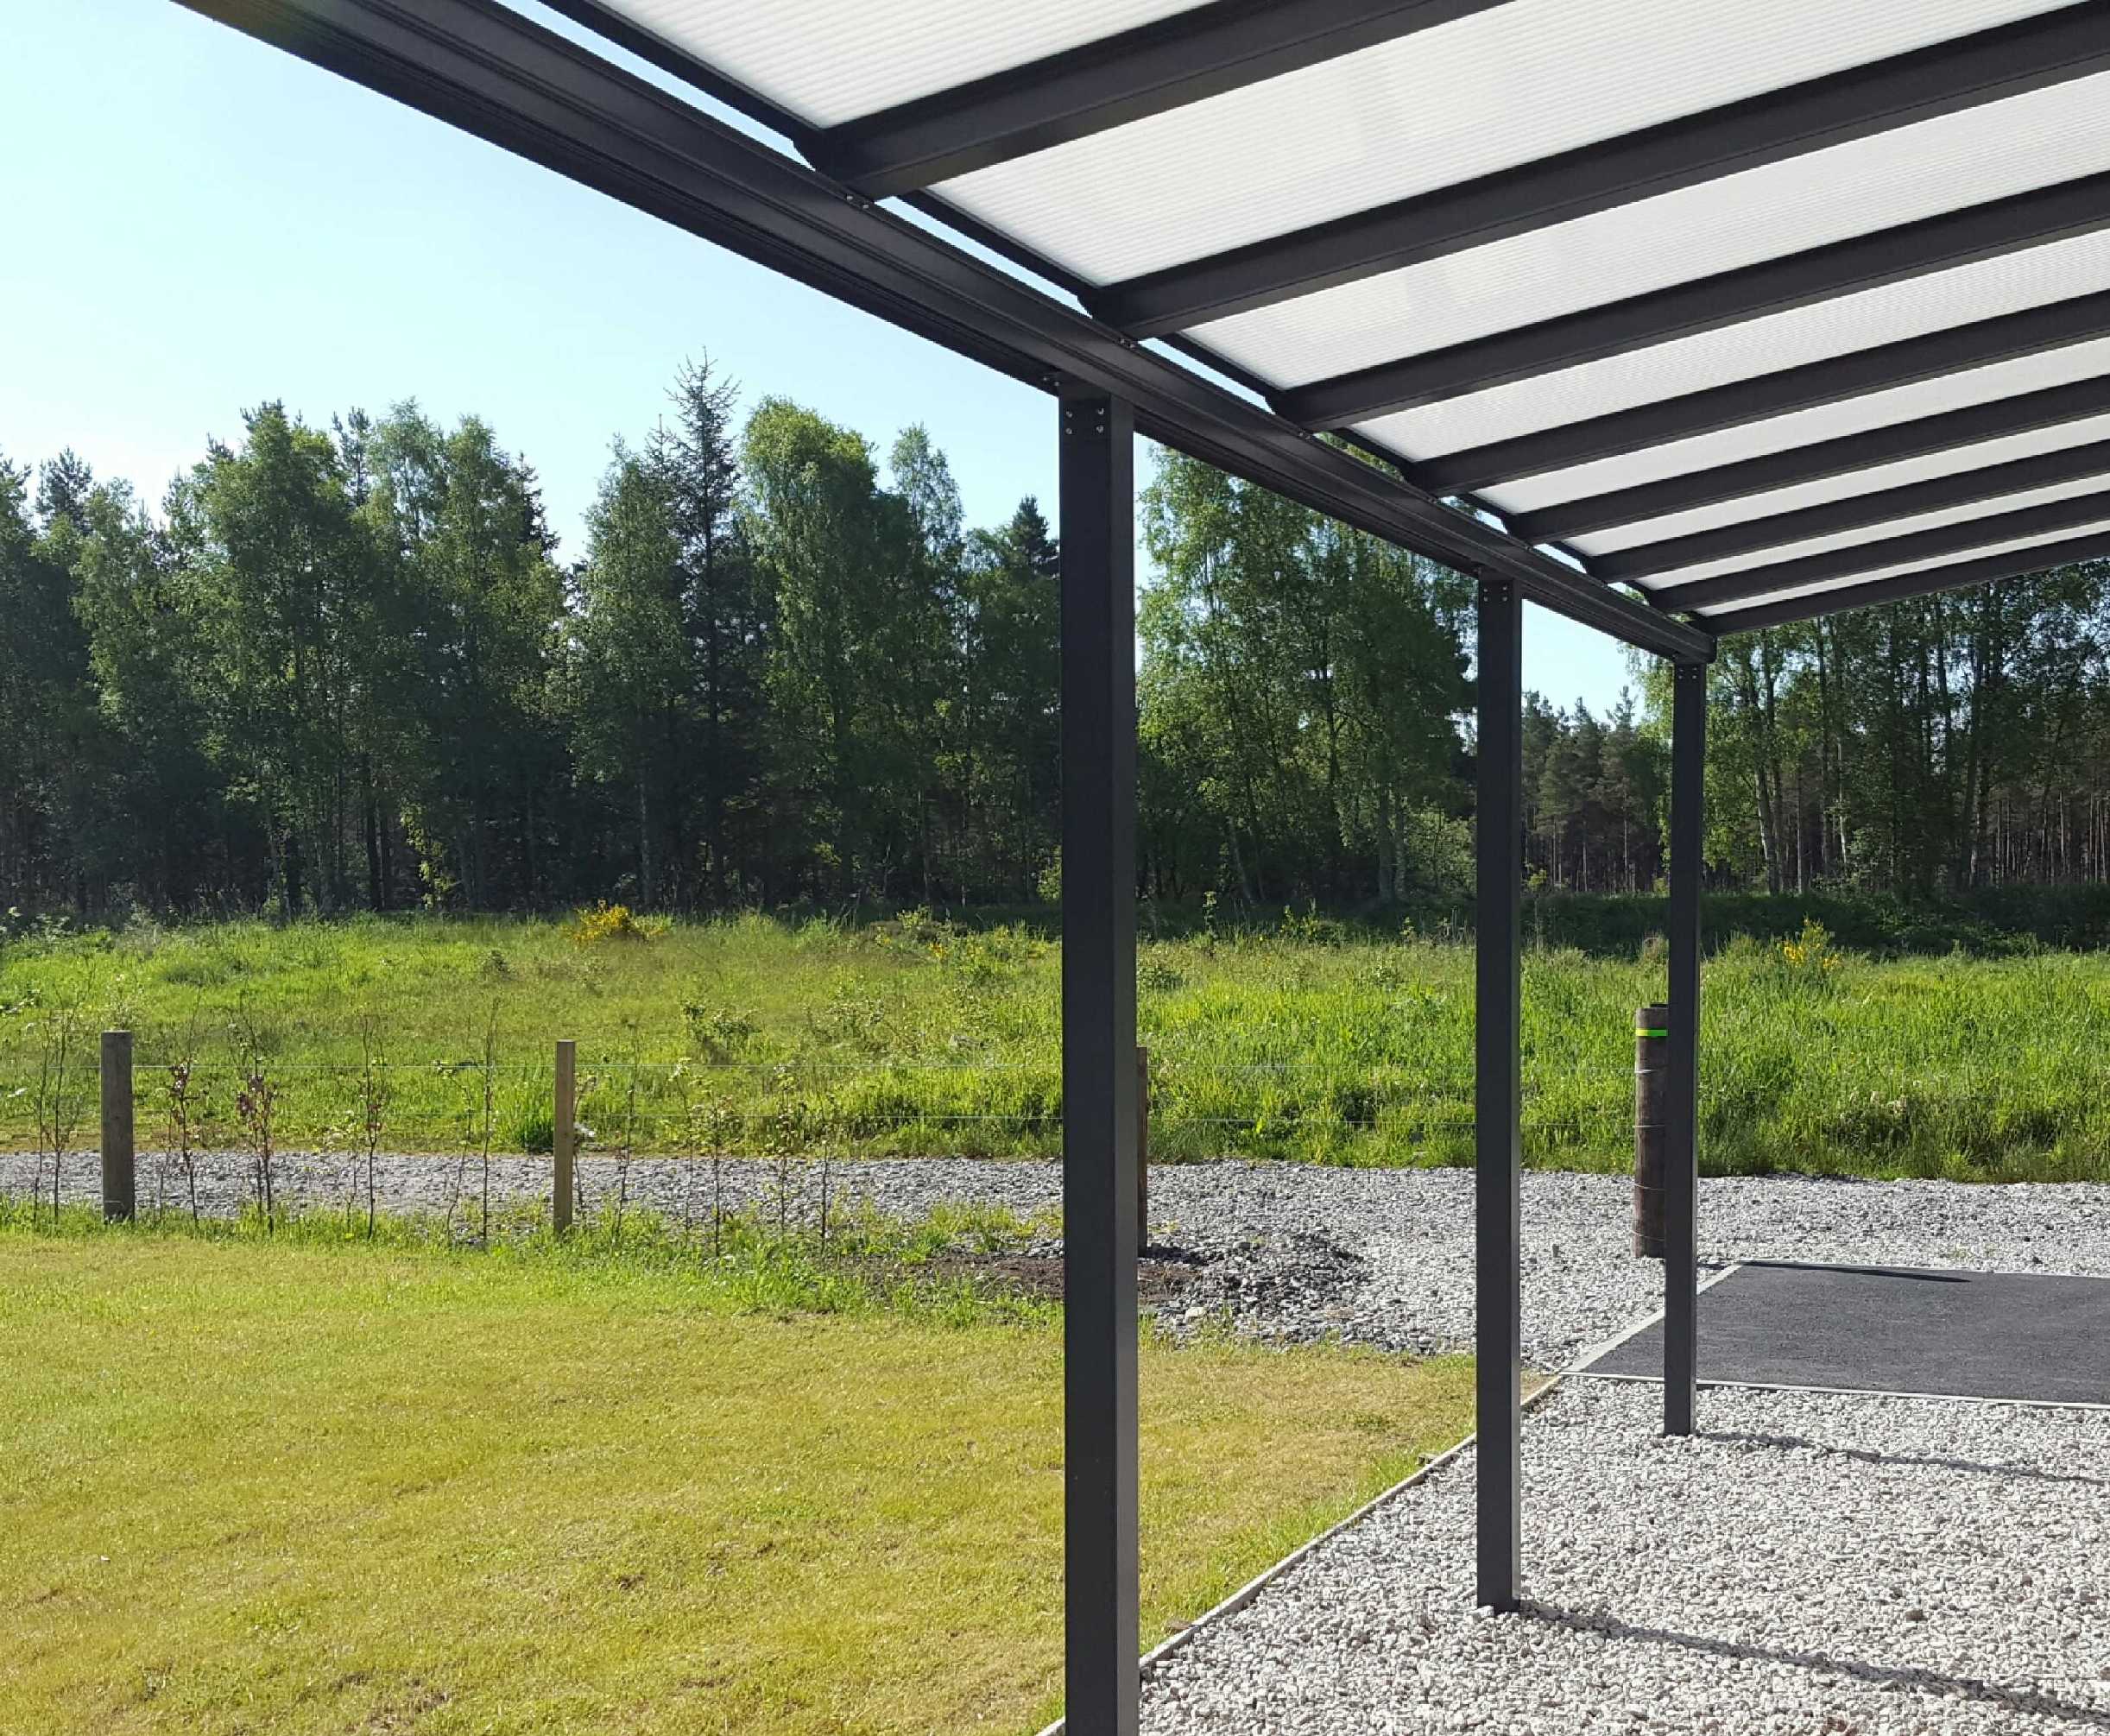 Omega Smart Lean-To Canopy, Anthracite Grey, 6mm Glass Clear Plate Polycarbonate Glazing - 6.3m (W) x 4.0m (P), (4) Supporting Posts